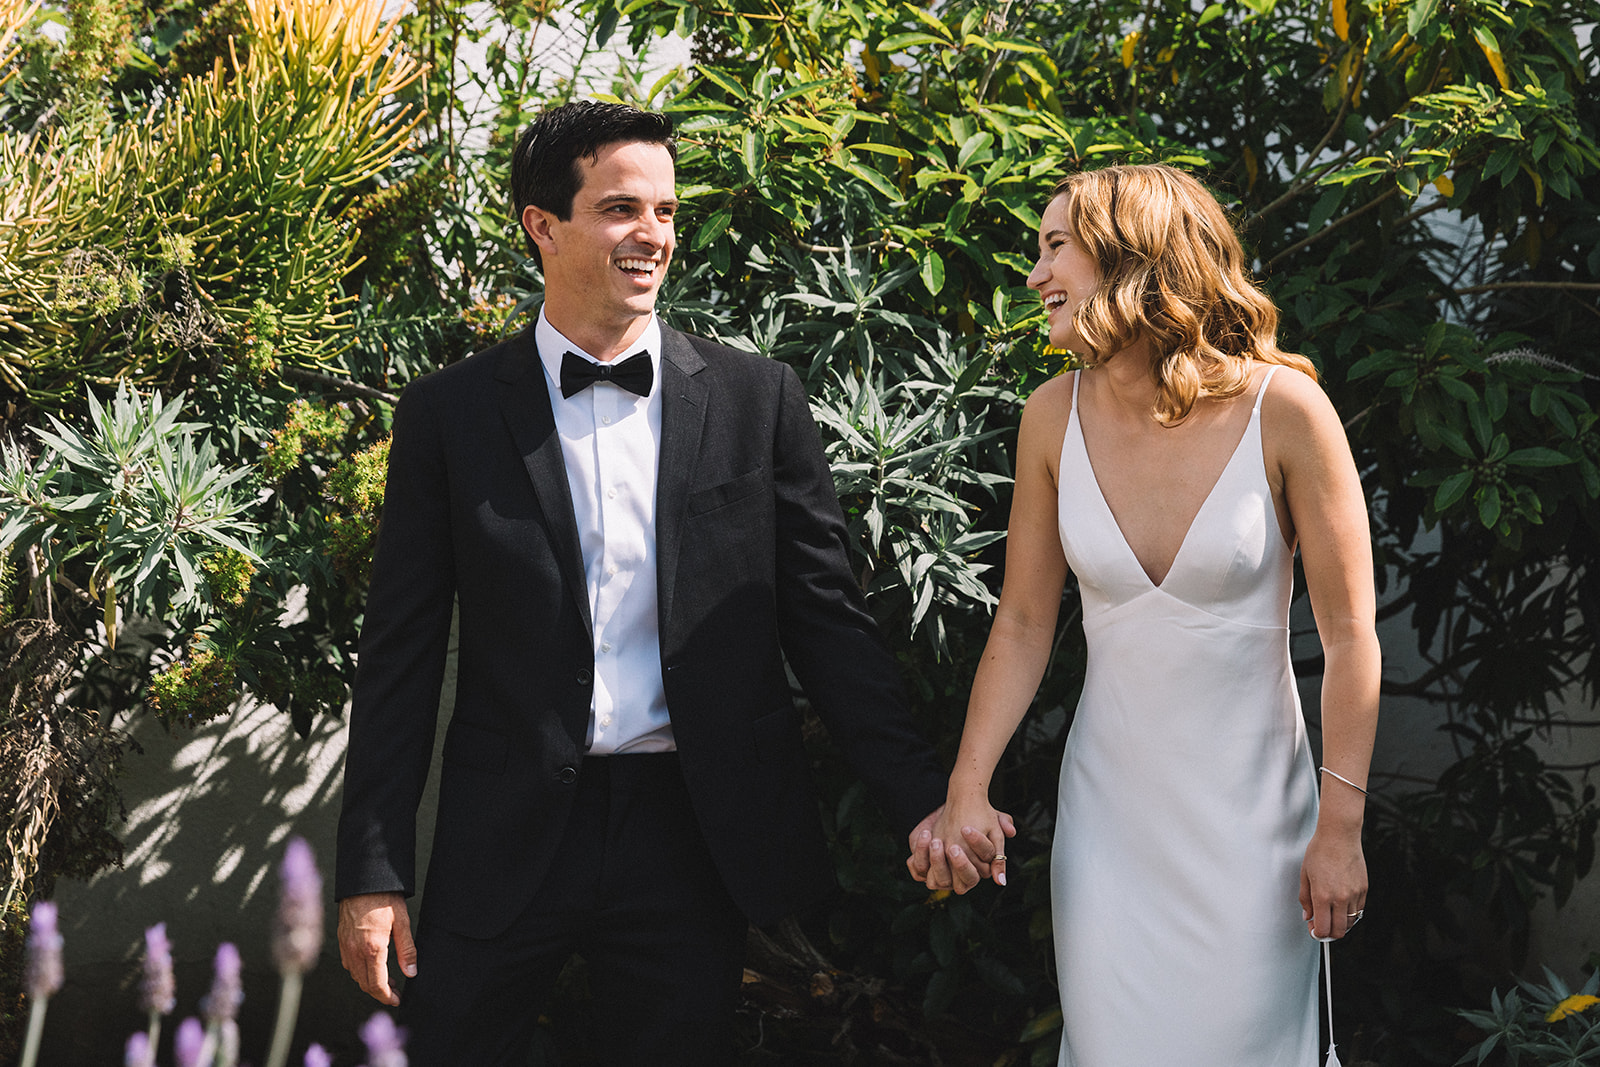 A classic black suit and simple wedding dress was the perfect casual Orange County, California beach wedding. 